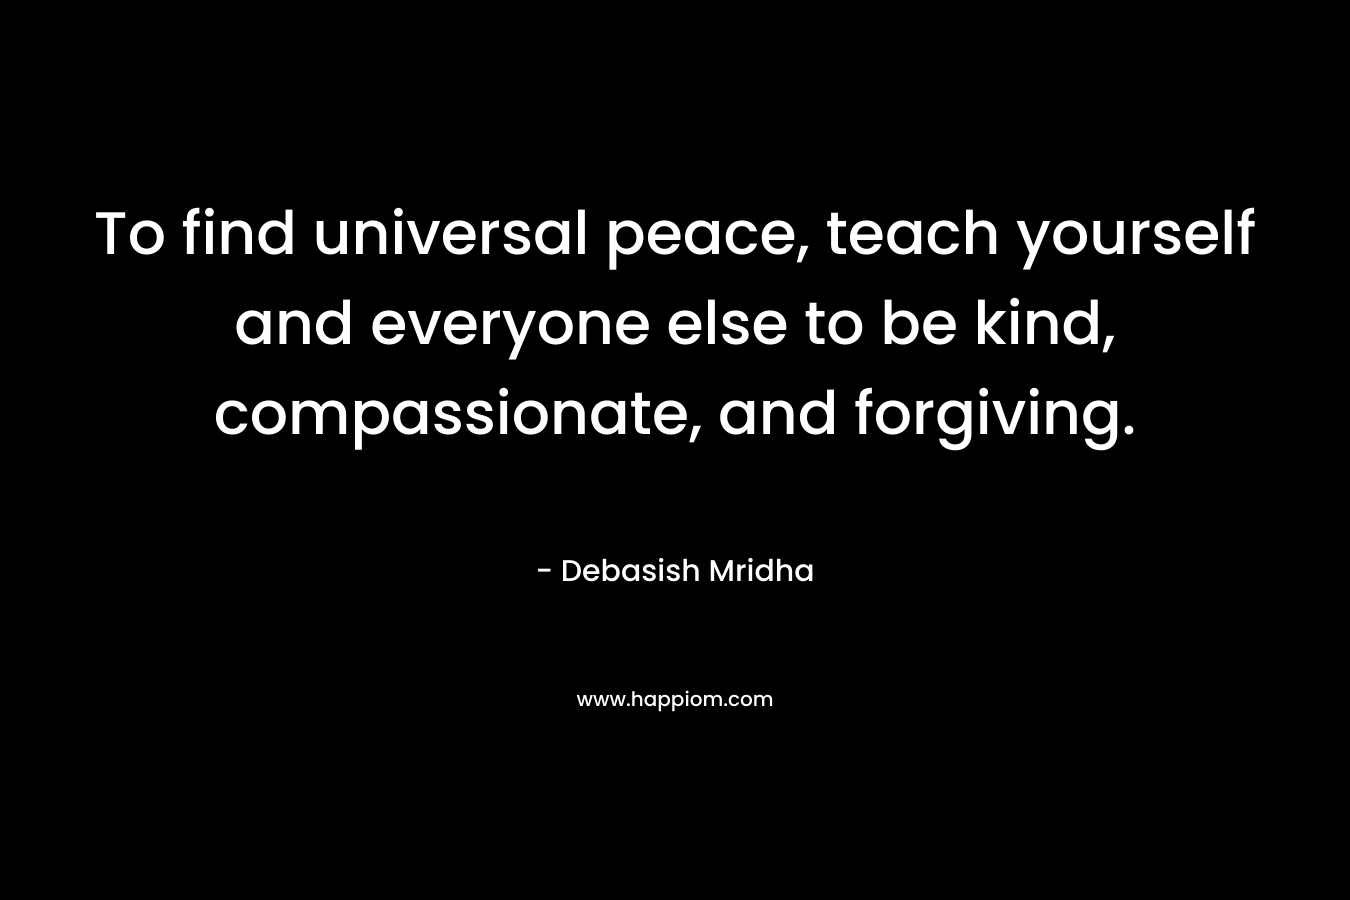 To find universal peace, teach yourself and everyone else to be kind, compassionate, and forgiving.